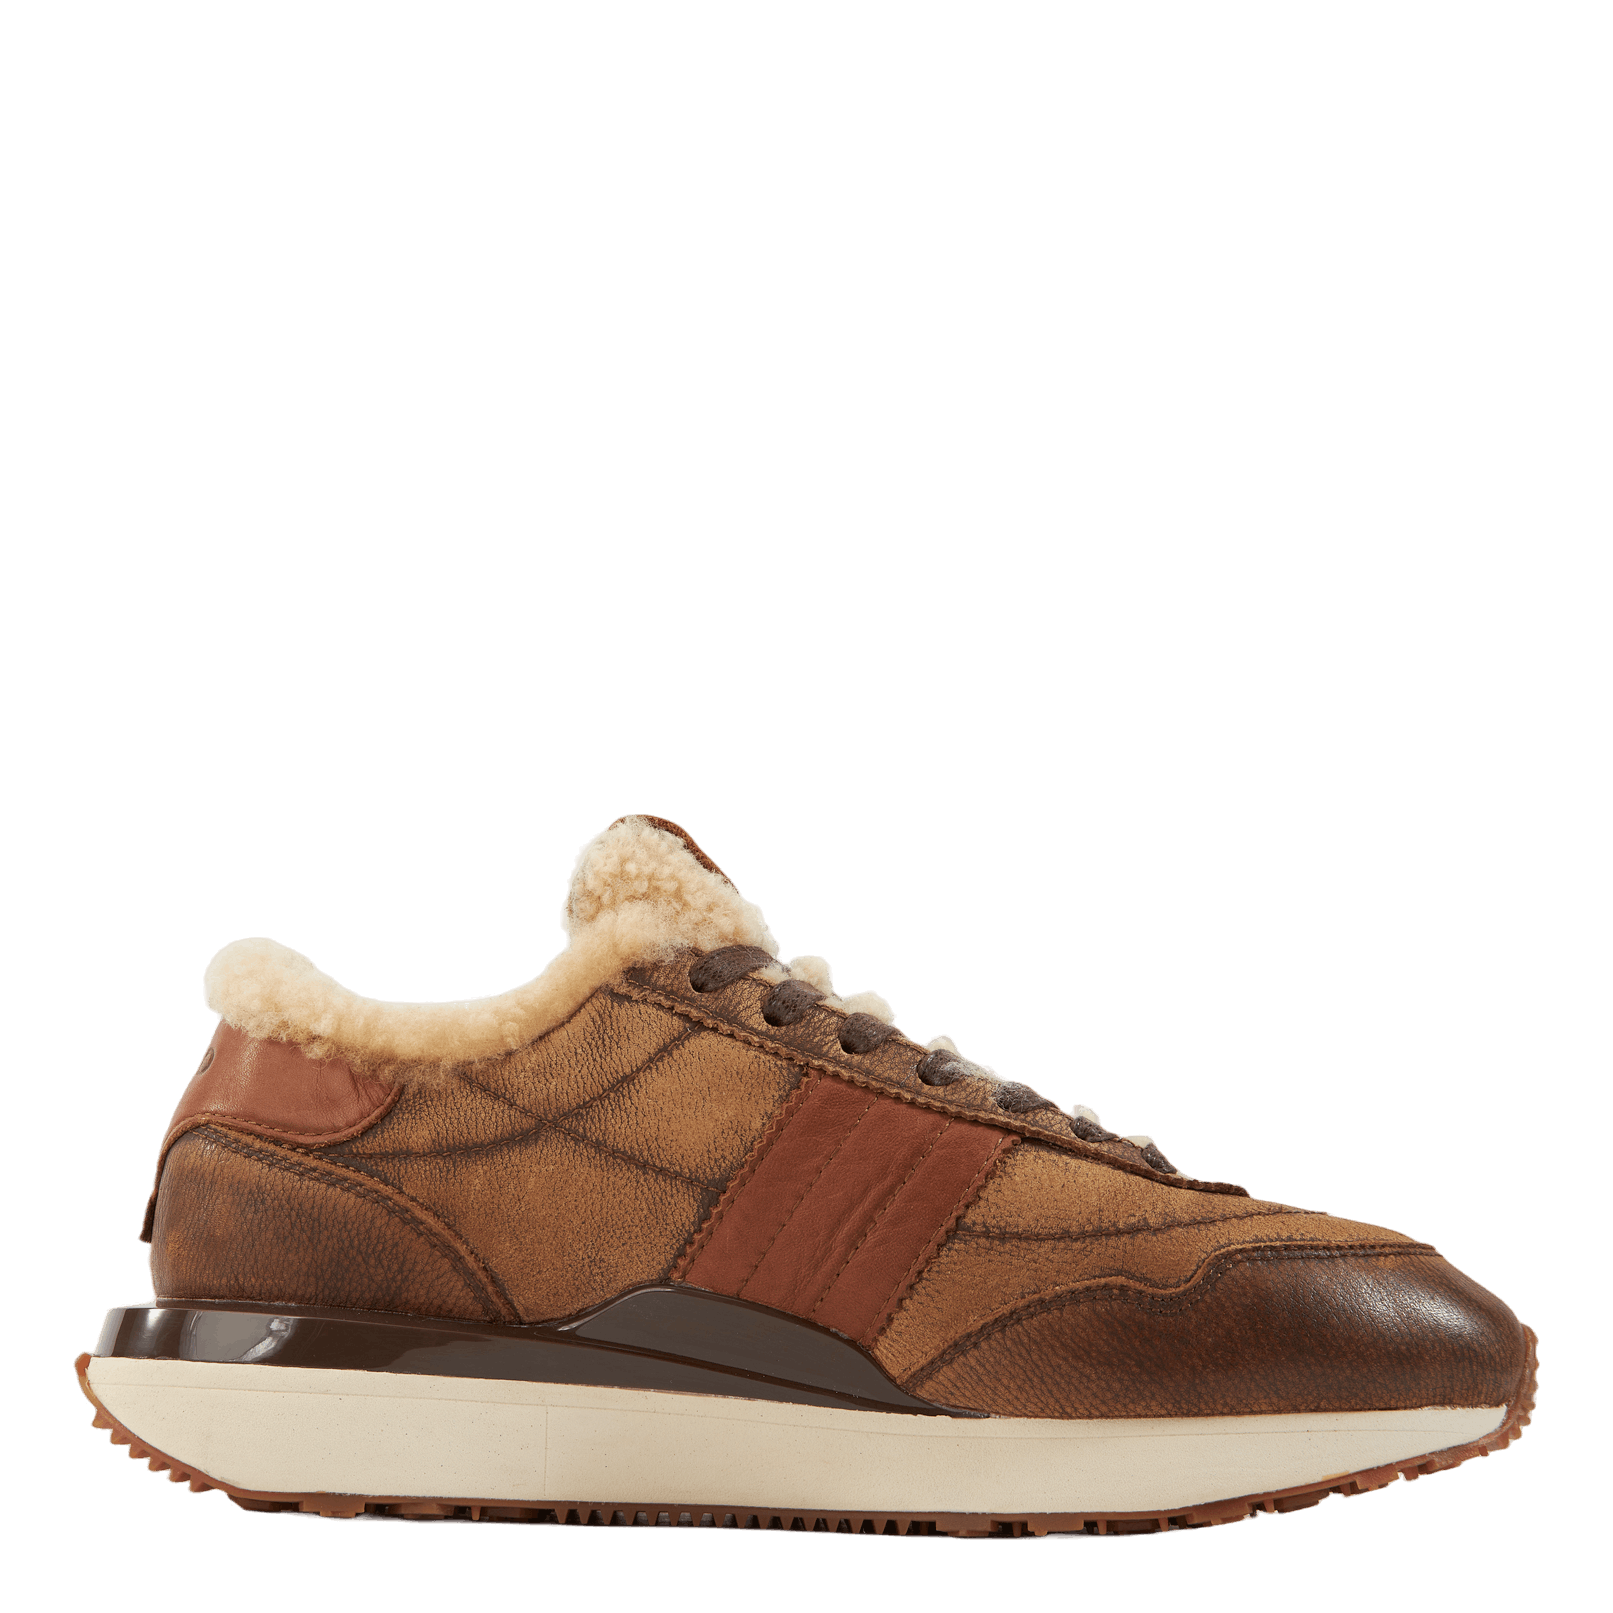 Train 89-sneakers-low Top Lace Brown